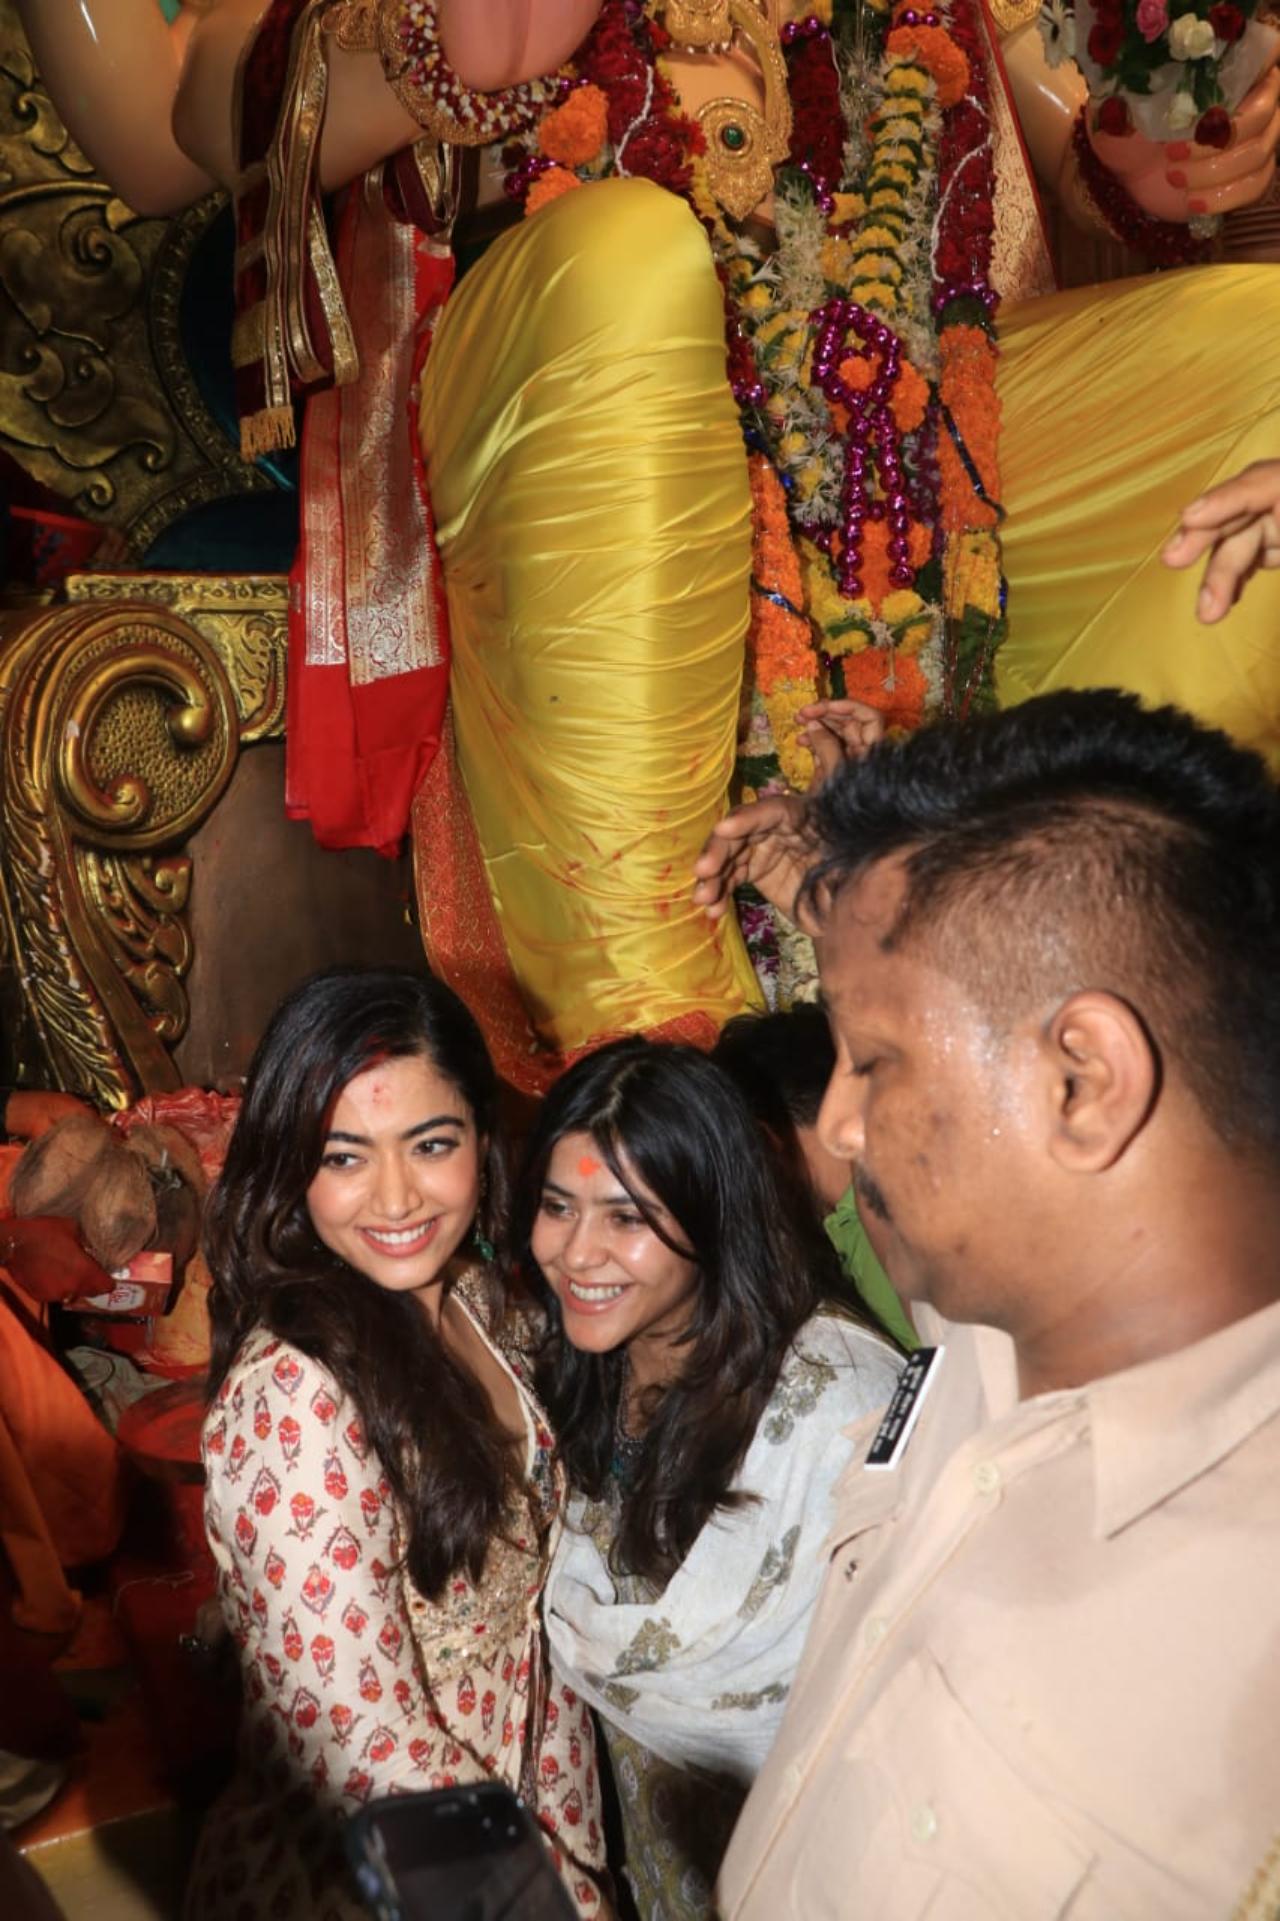 Rashmika Mandanna is all set to make her Hindi film debut with 'Goodbye' in October. The actress was in Mumbai on Tuesday for the trailer launch of her film. Post the trailer launch, Rashmika was seen visiting Lalbaugcha Raja along with co-star Neena Gupta and film's producer Ektaa Kapoor